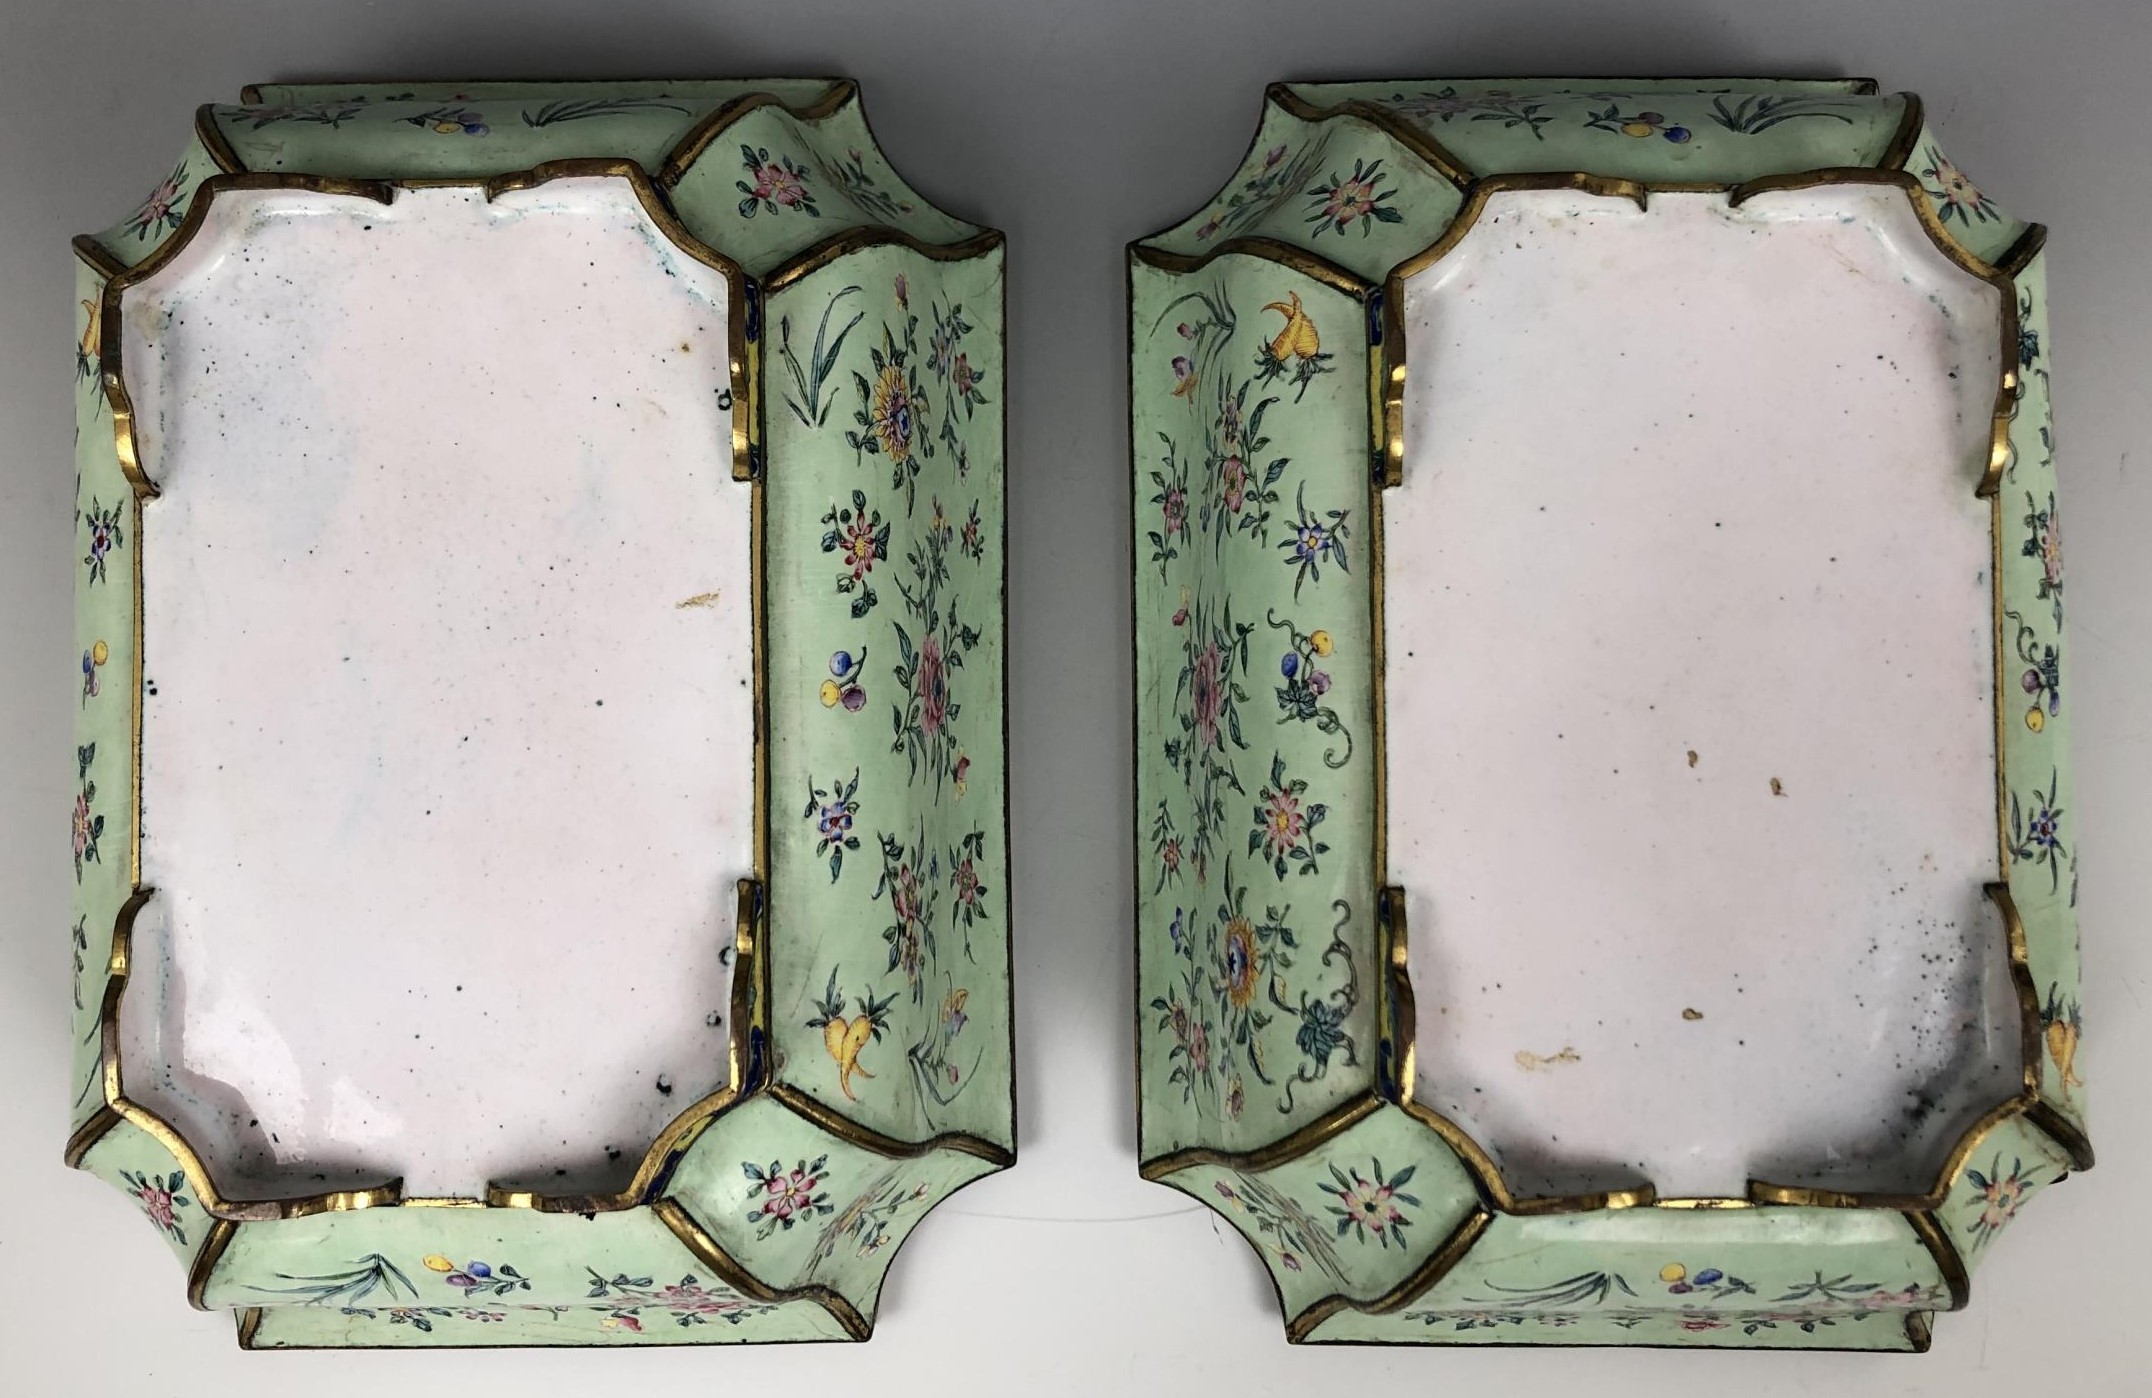 A pair of Chinese Canton enamel jardinieres, decorated flowers on a pale green ground, 19.5 cm - Image 5 of 6